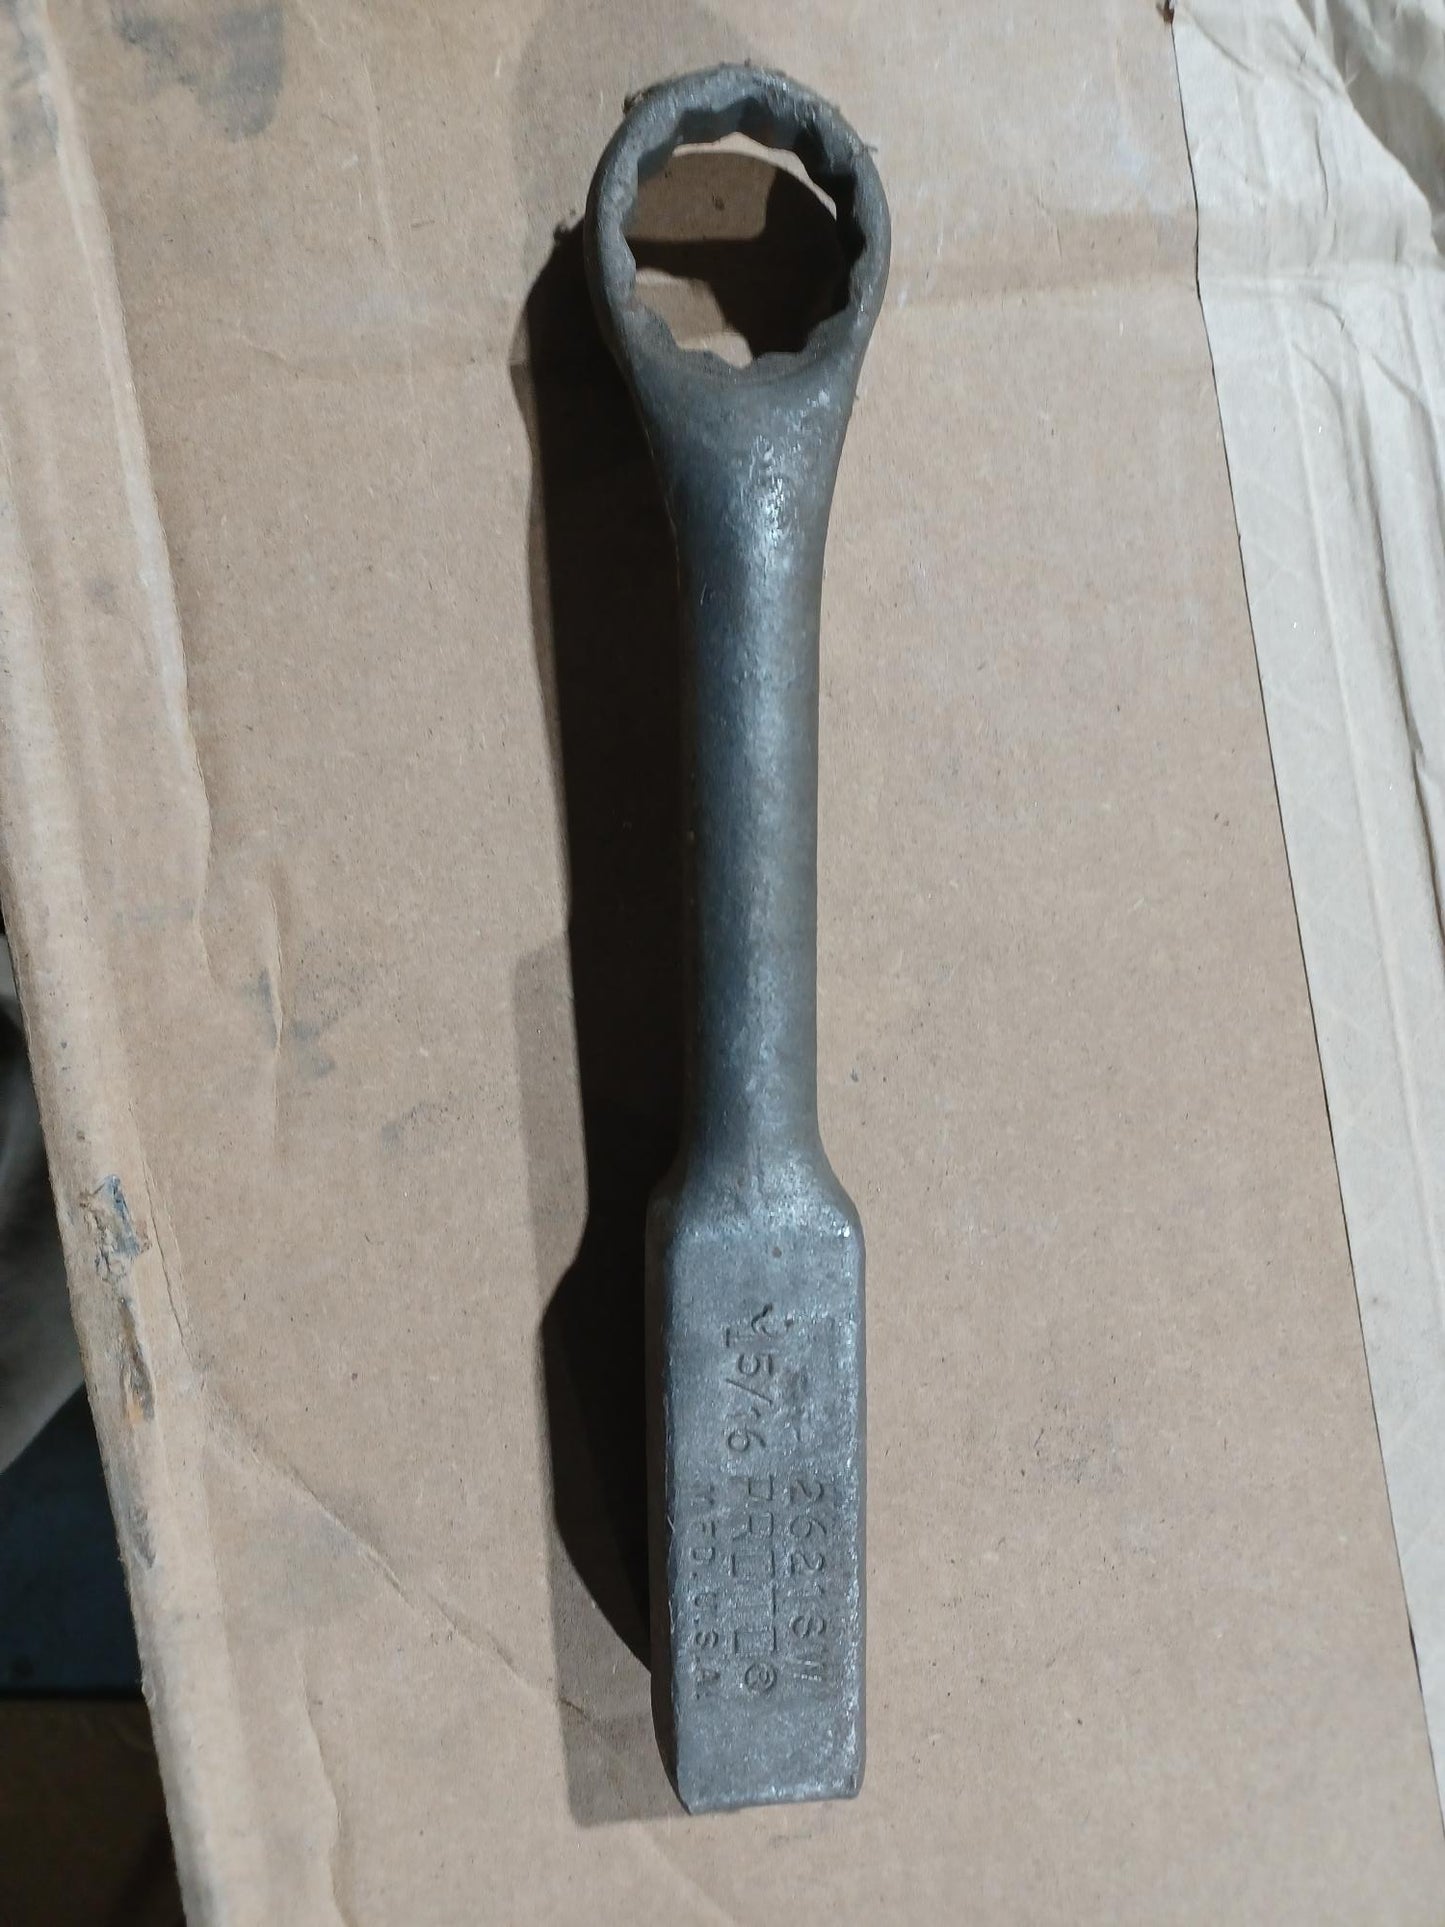 Knocker Wrench 1-5/16 in. Offset Striking Wrench-  - Used Ready to Ship